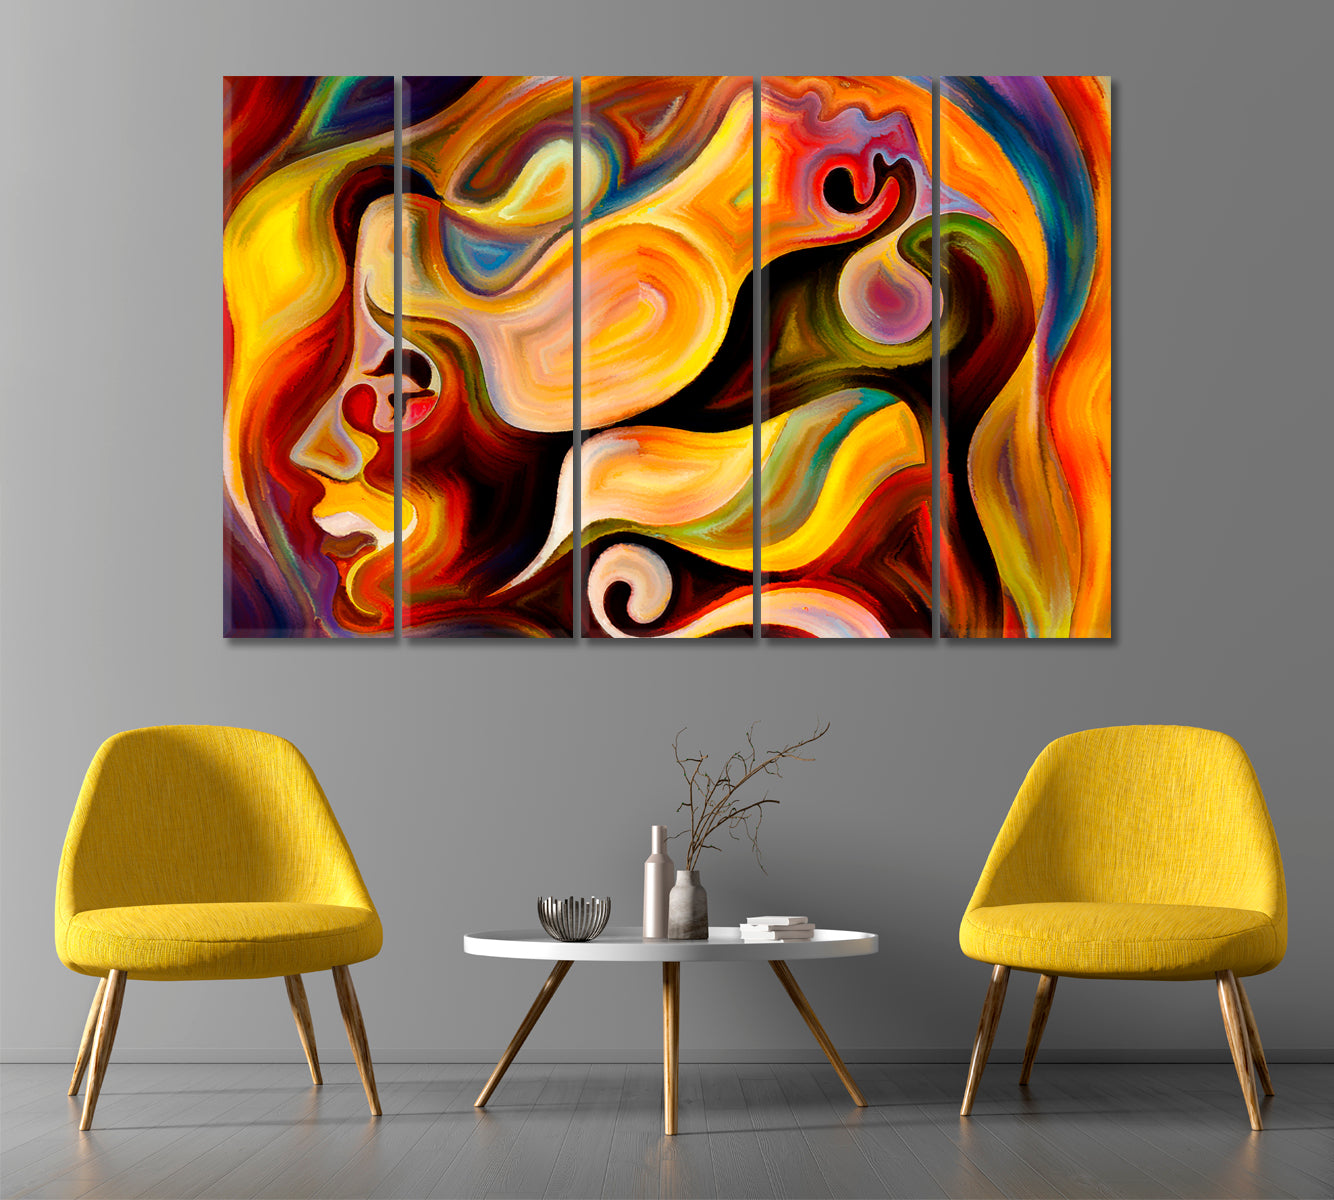 Creative Abstraction Colors And People Abstract Art Print Artesty 5 panels 36" x 24" 